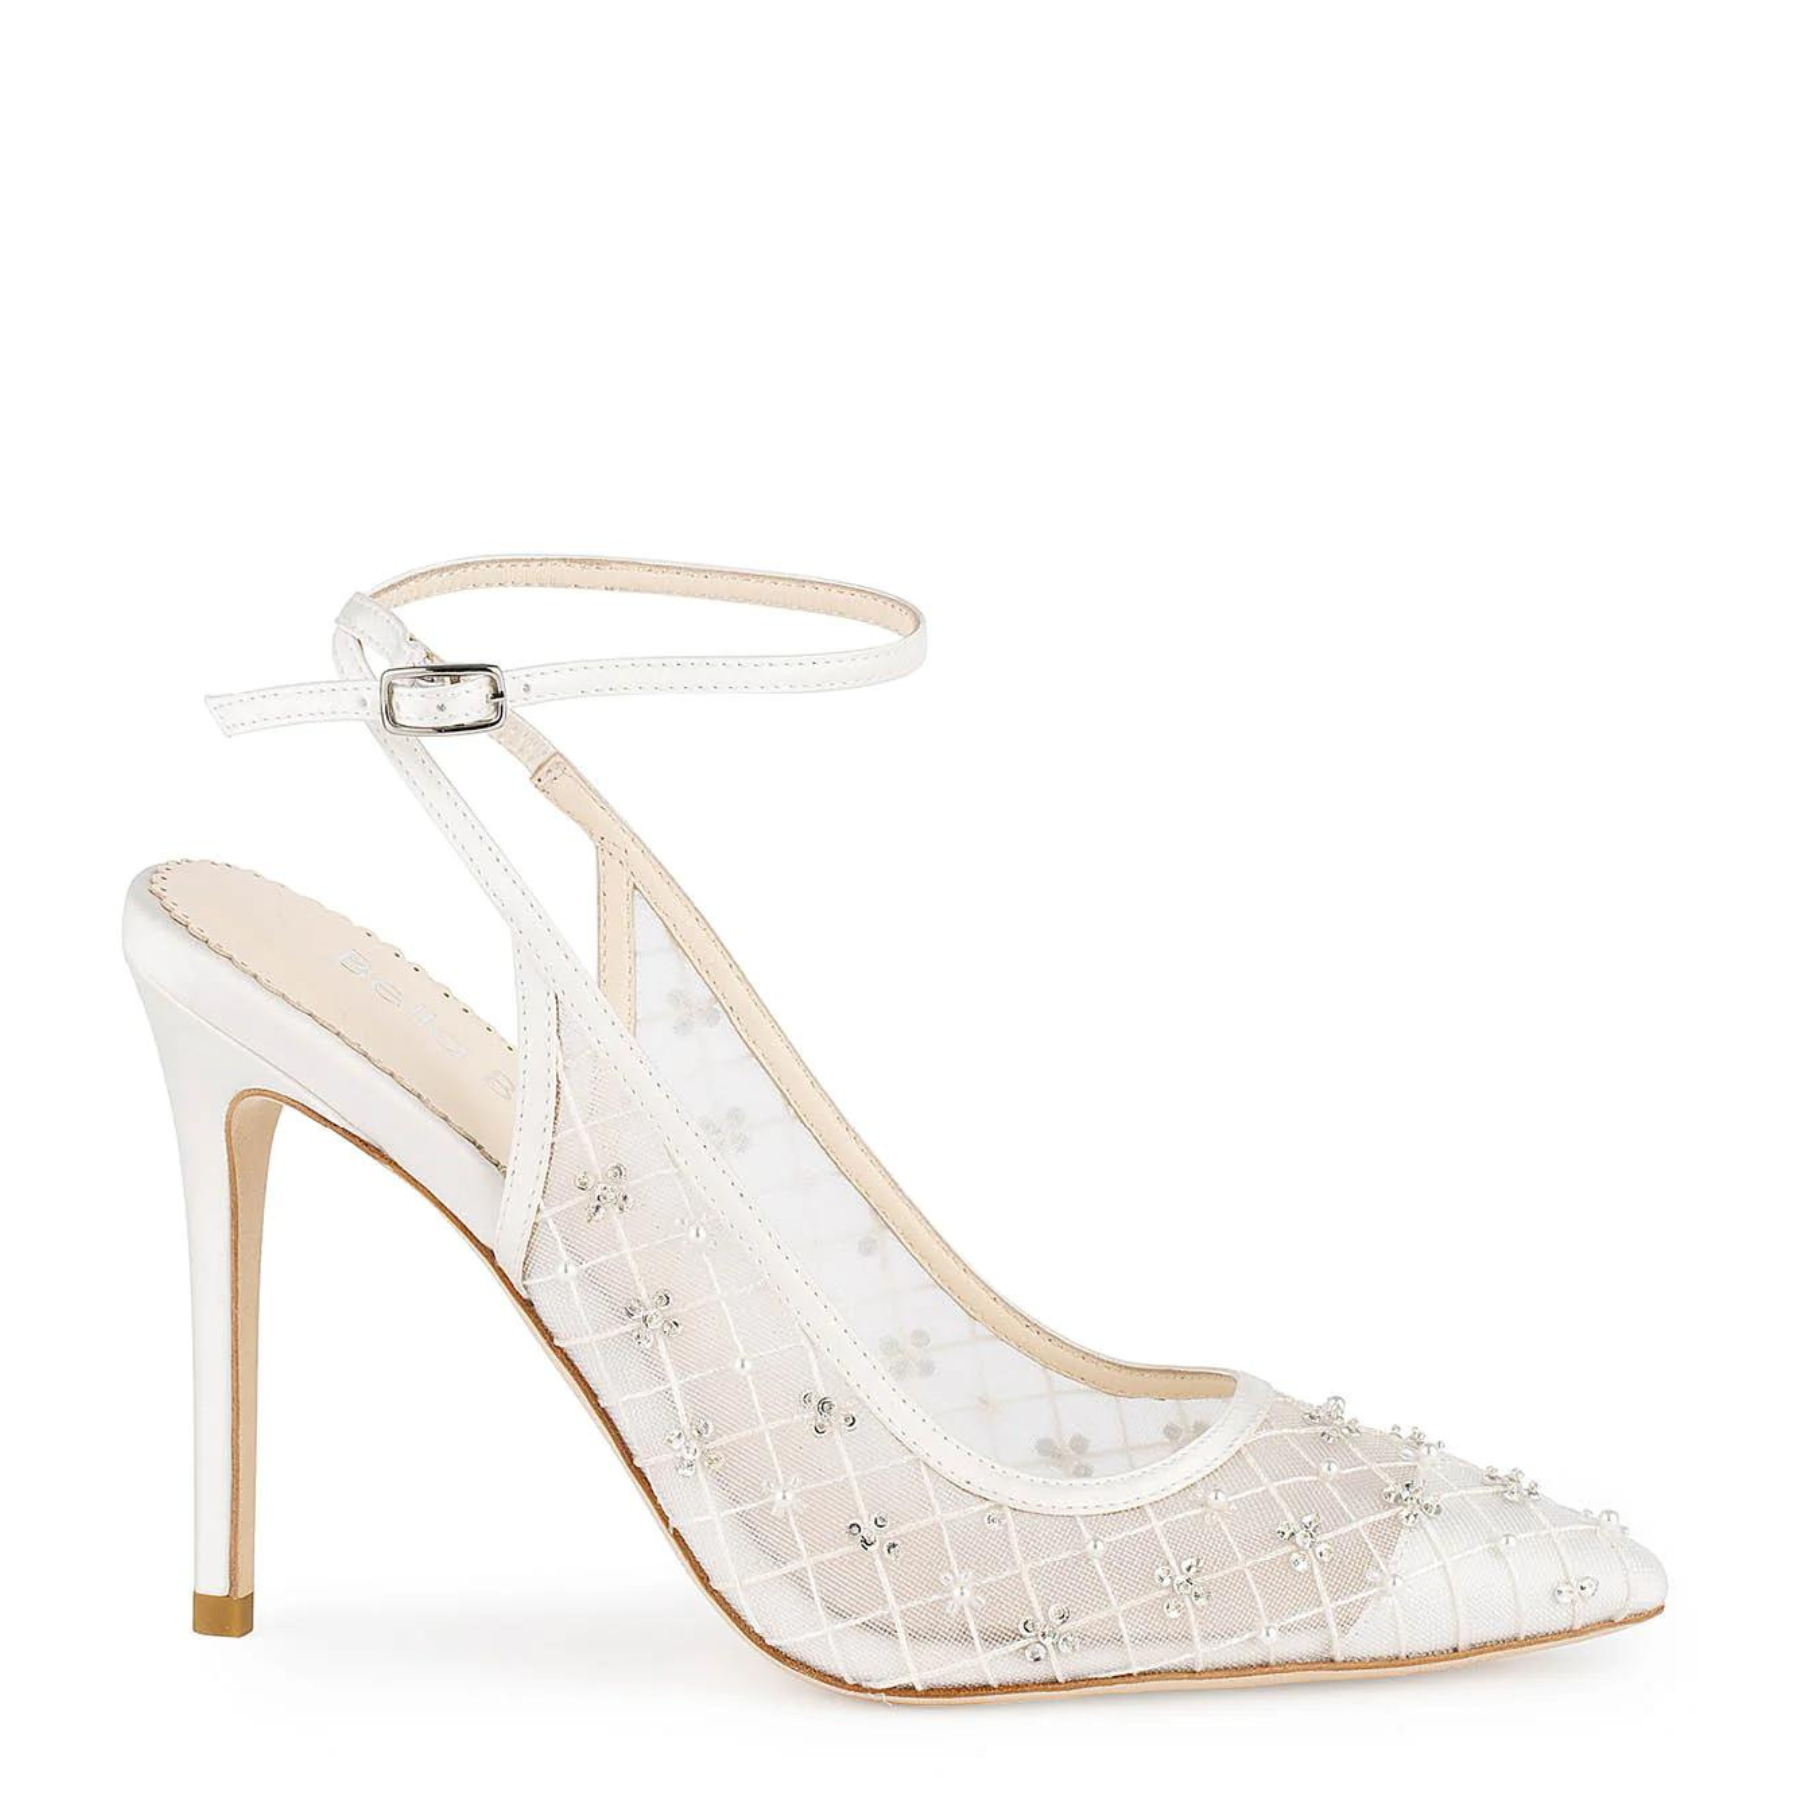 Kennedy - Ankle Strap Argyle Patterned Bridal Stiletto with Crystals and Pearl